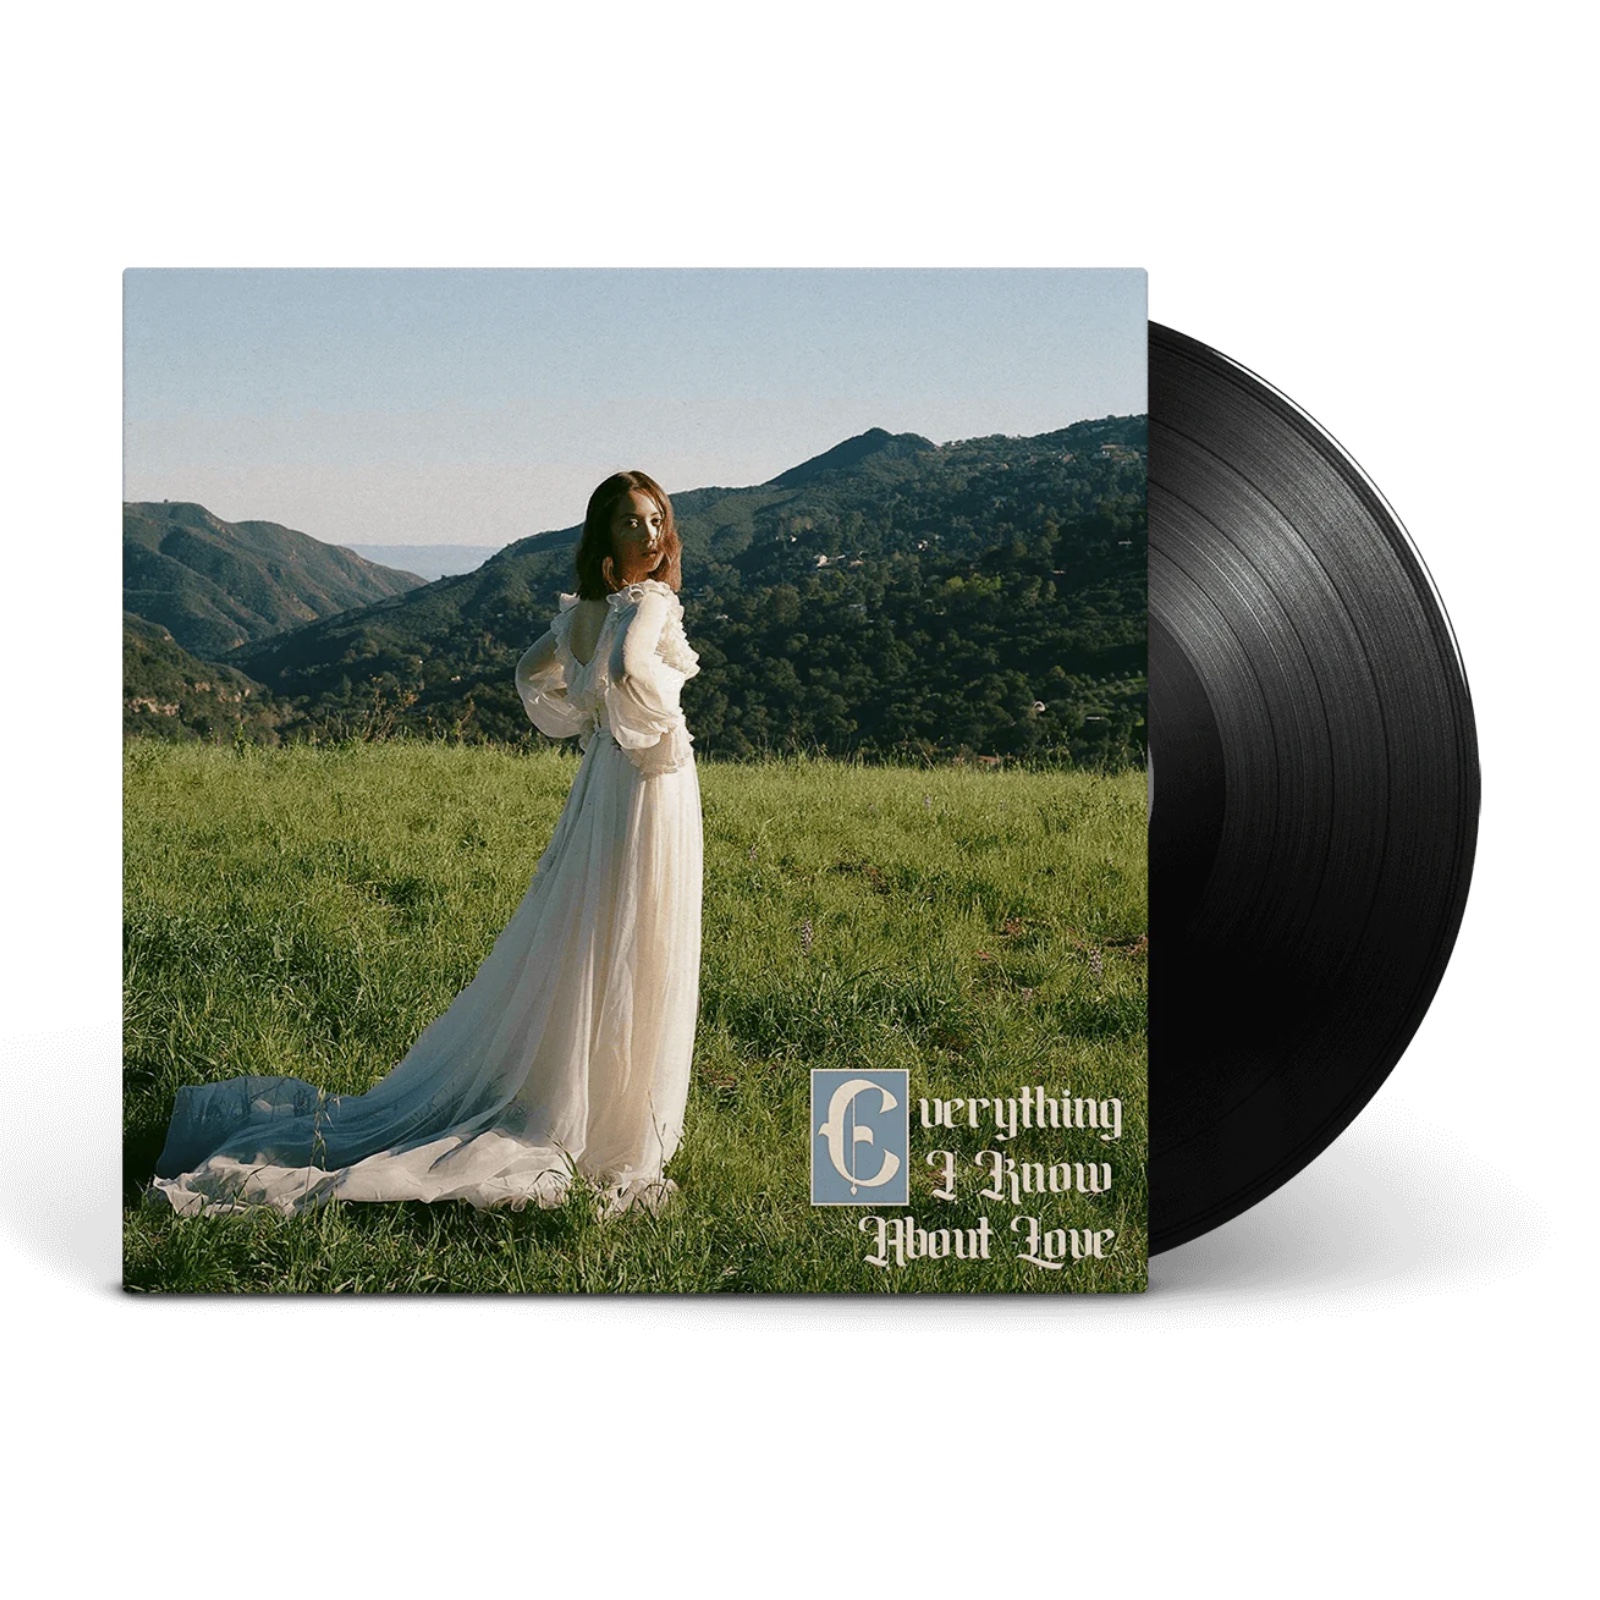 Laufey (라이베이) - Everything I Know About Love [LP]